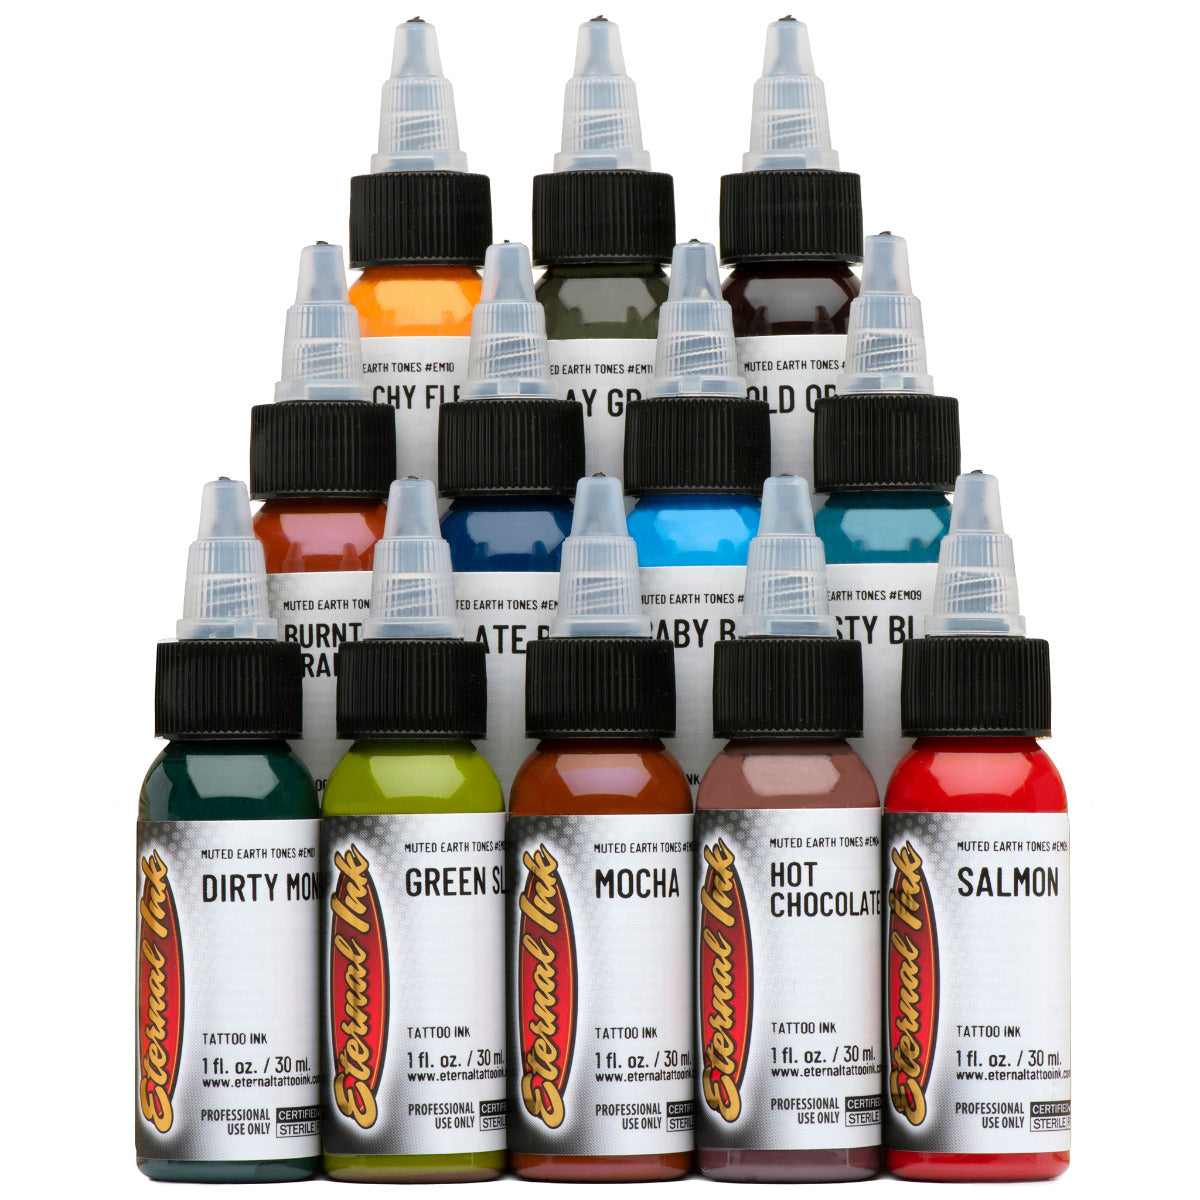 Muted Earth Tones Set Ink - tommys supplies